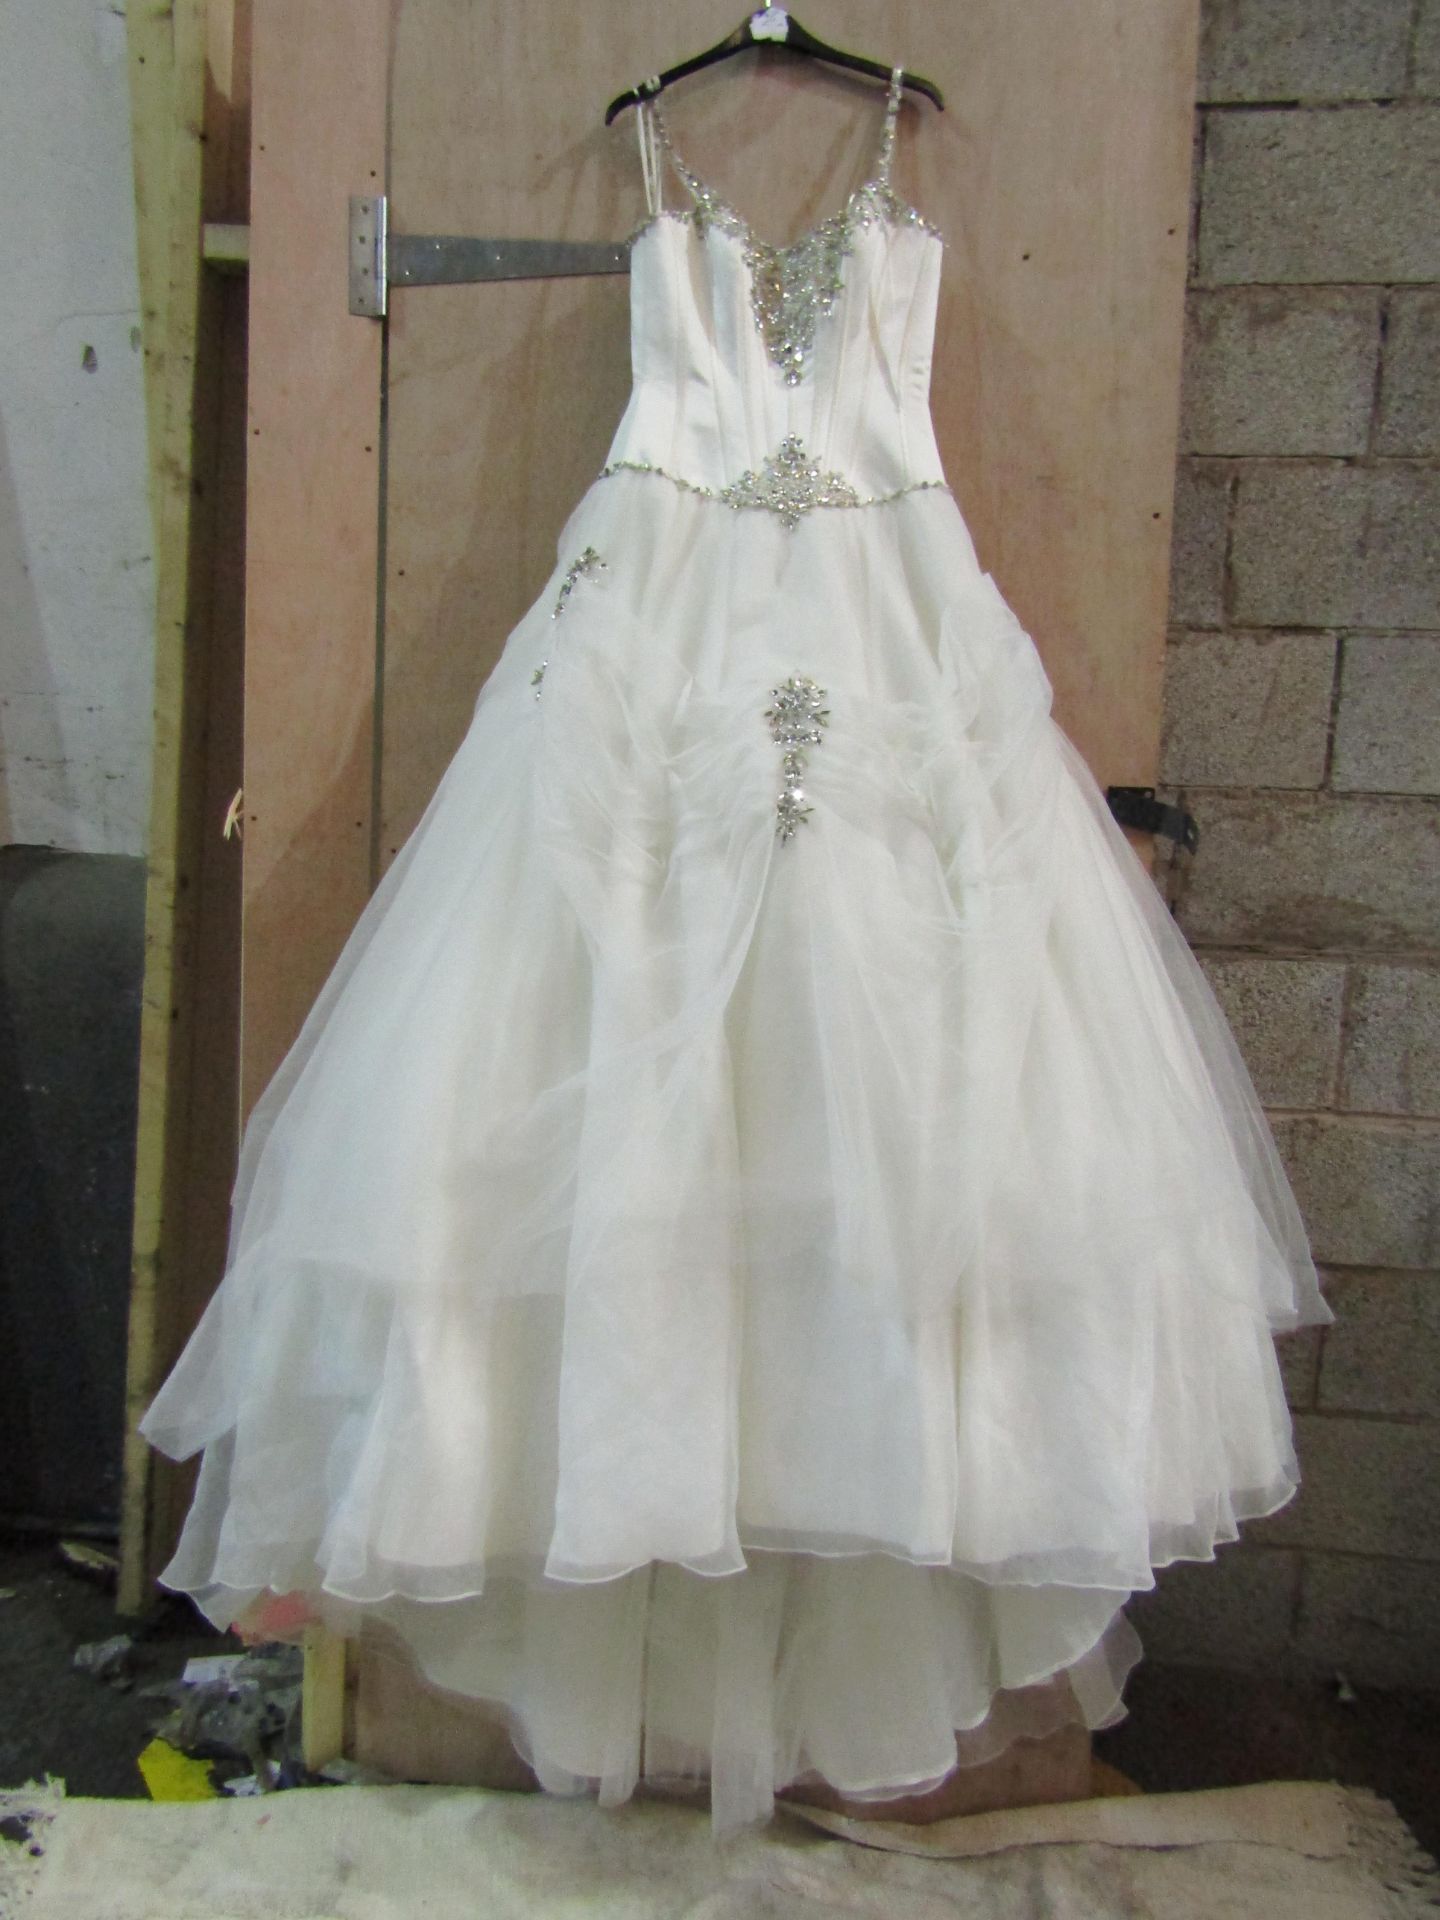 Approx 500 pieces of wedding shop stock to include wedding dresses, mother of the bride, dresses, - Image 77 of 108